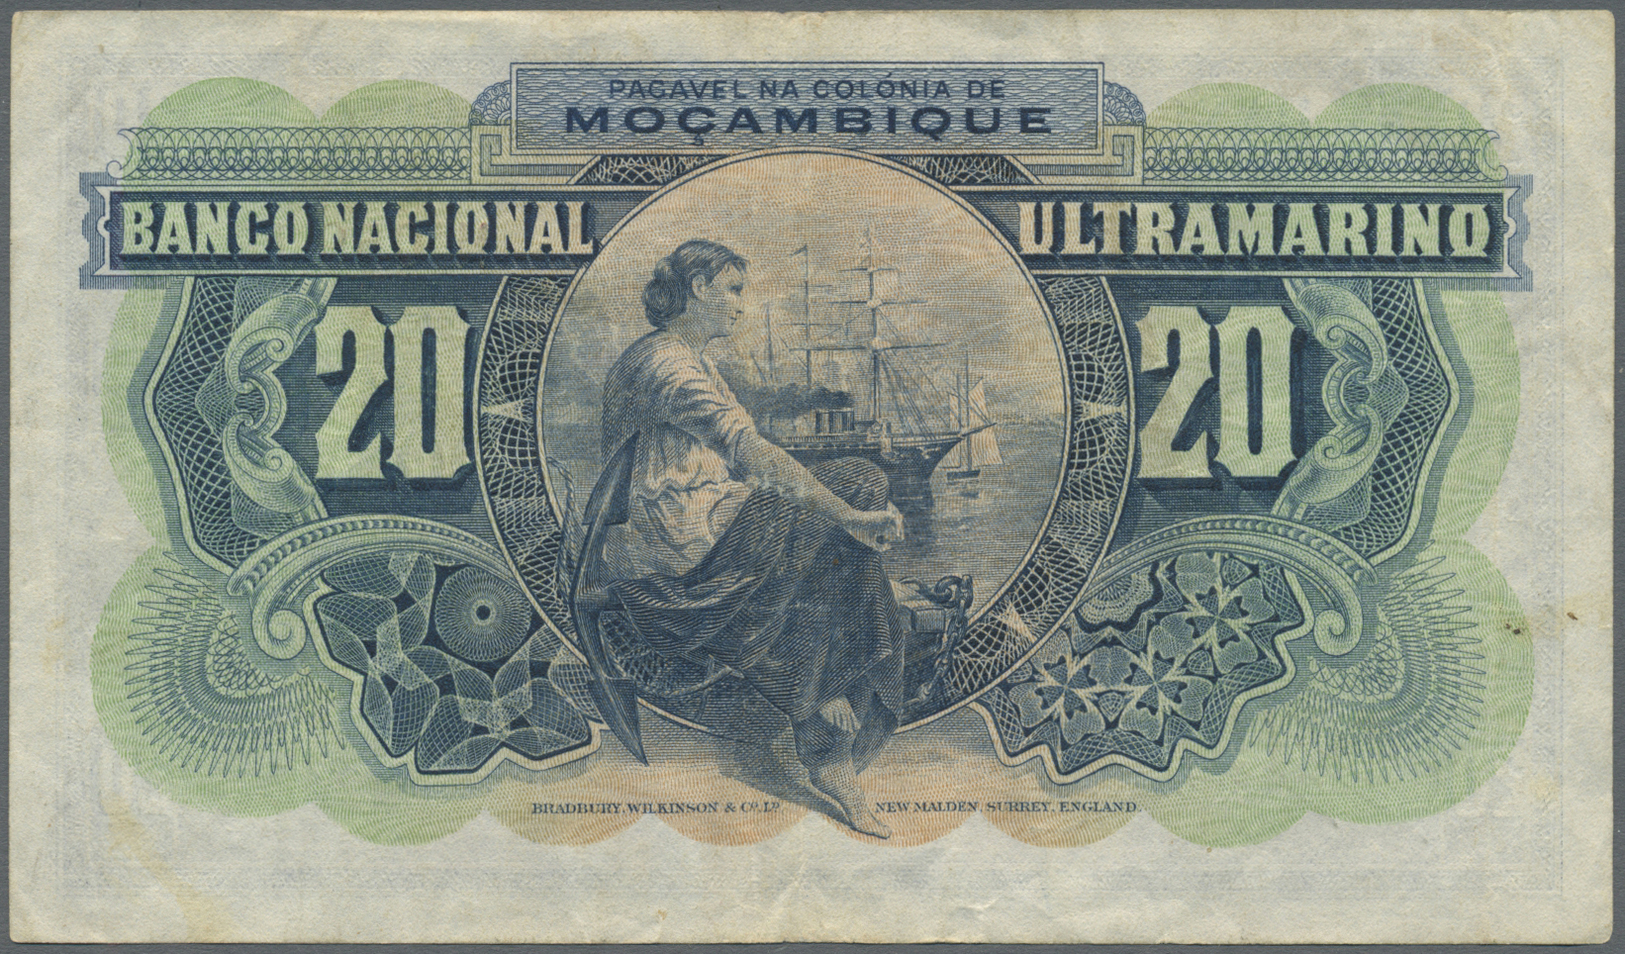 01765 Mozambique: 20 Escudos 1937 P. 74, Used With Several Lighter Folds And Creases In Paper, No Holes Or Tears, Still - Mozambique